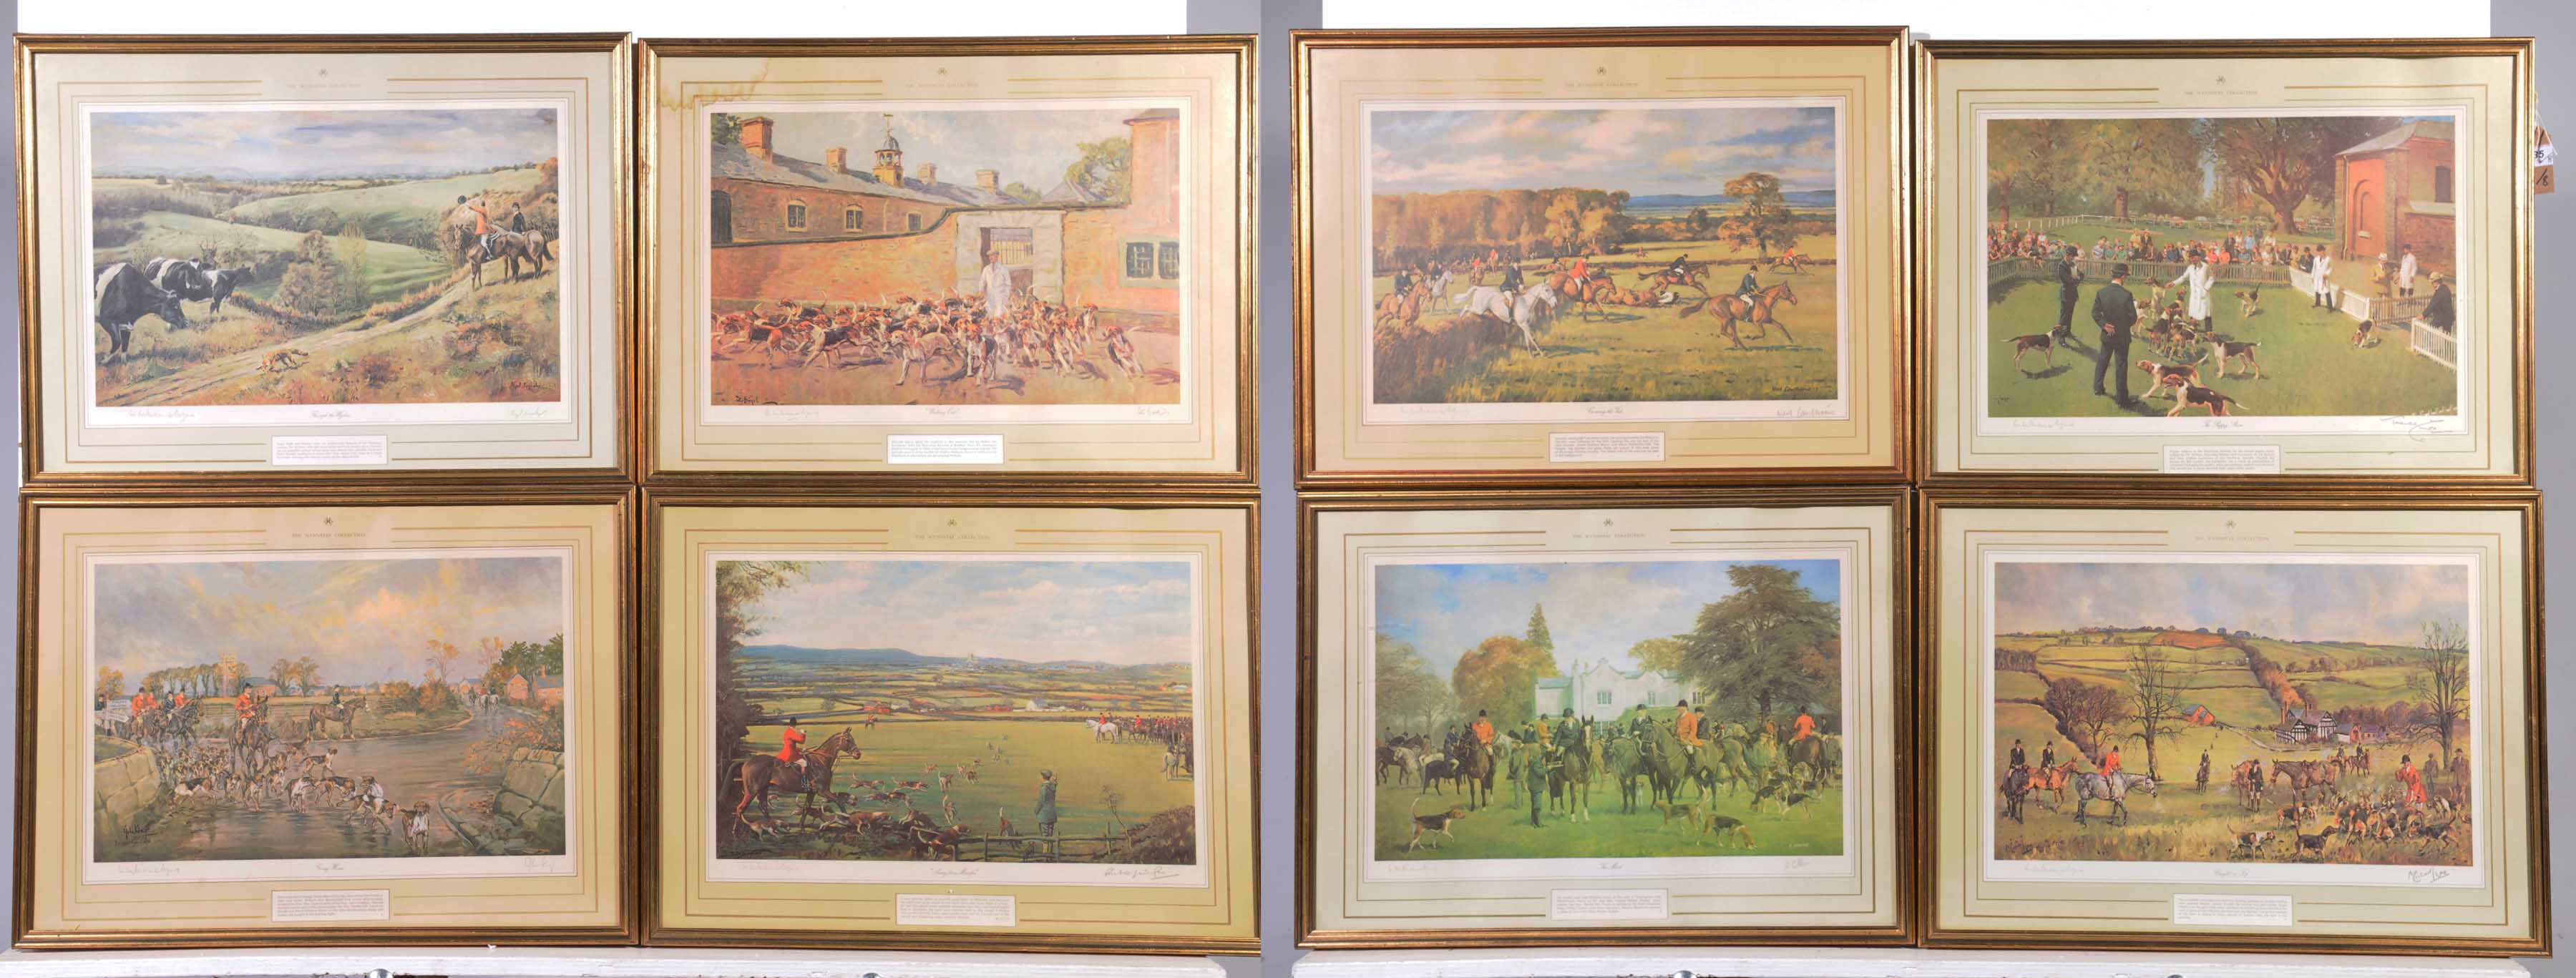 The Wynnstay Collection-A group of eight hunting prints Offset lithographs to include "the puppy